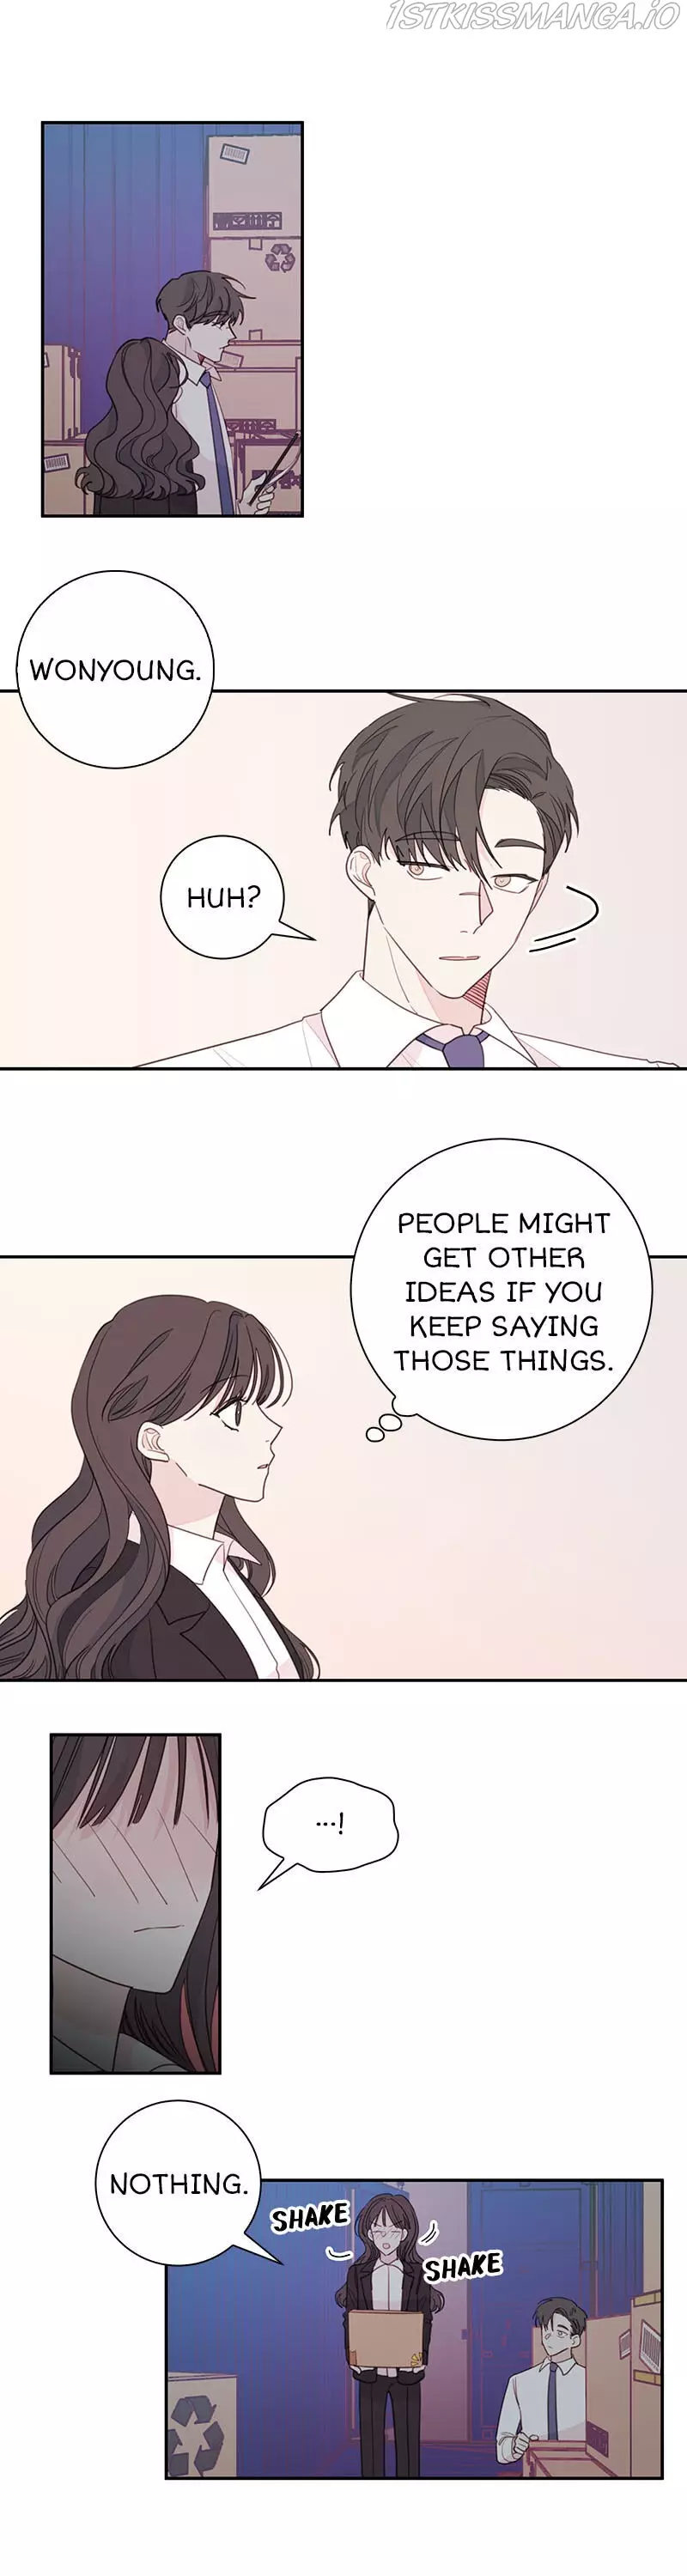 Today Living With You - 54 page 7